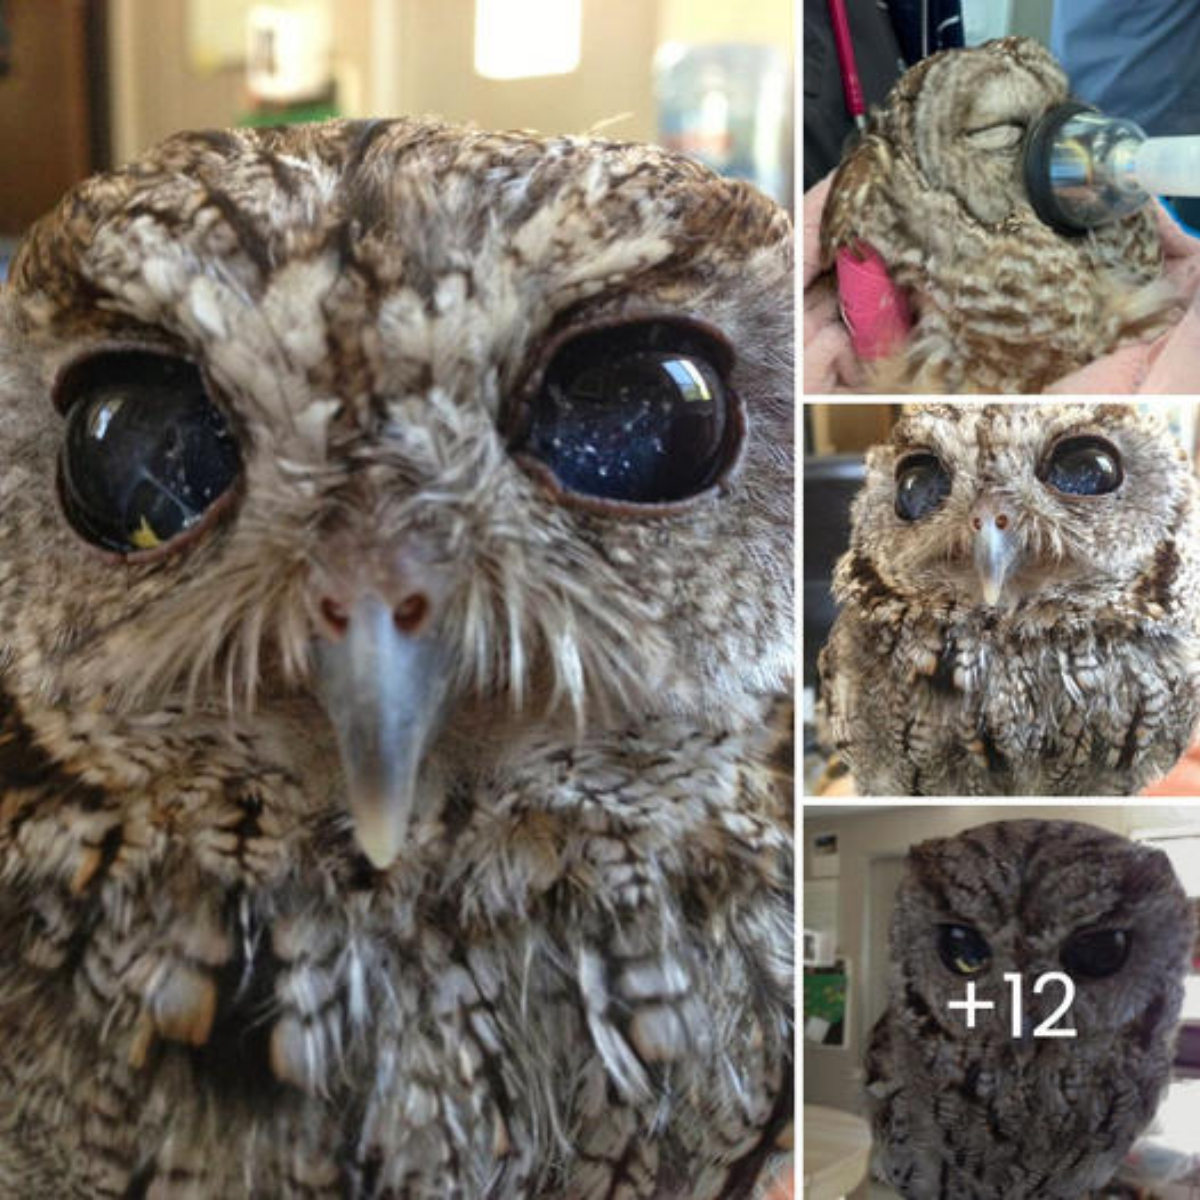 Woa! Most Beautiful Eyes Ever but Sad. Heartwarming Story of Wildlife Rescue Center Finds Owl with Blind but Incredible Eyes Shining Like Little Galaxies